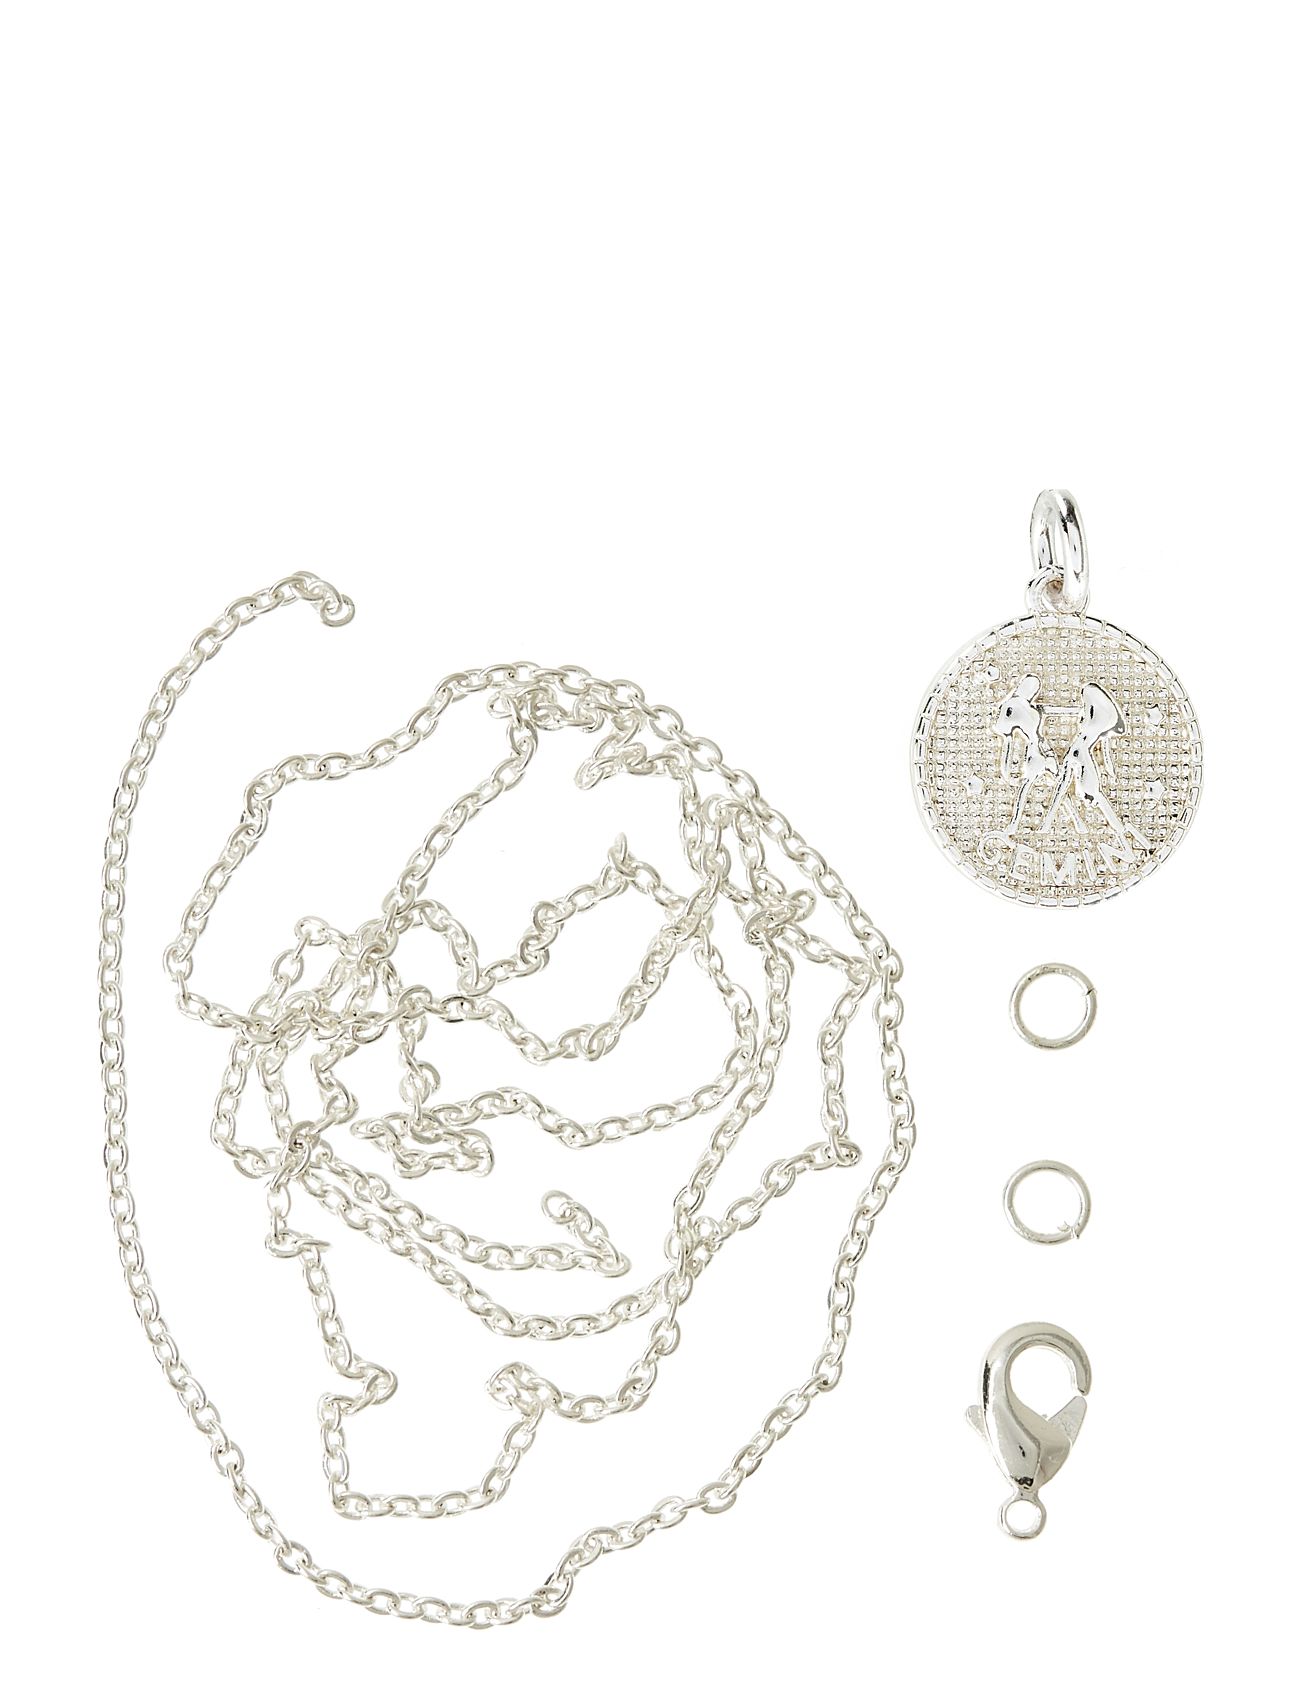 Zodiac Coin Pendant And Chain Set, Gemini Toys Creativity Drawing & Crafts Craft Jewellery & Accessories Silver Me & My Box